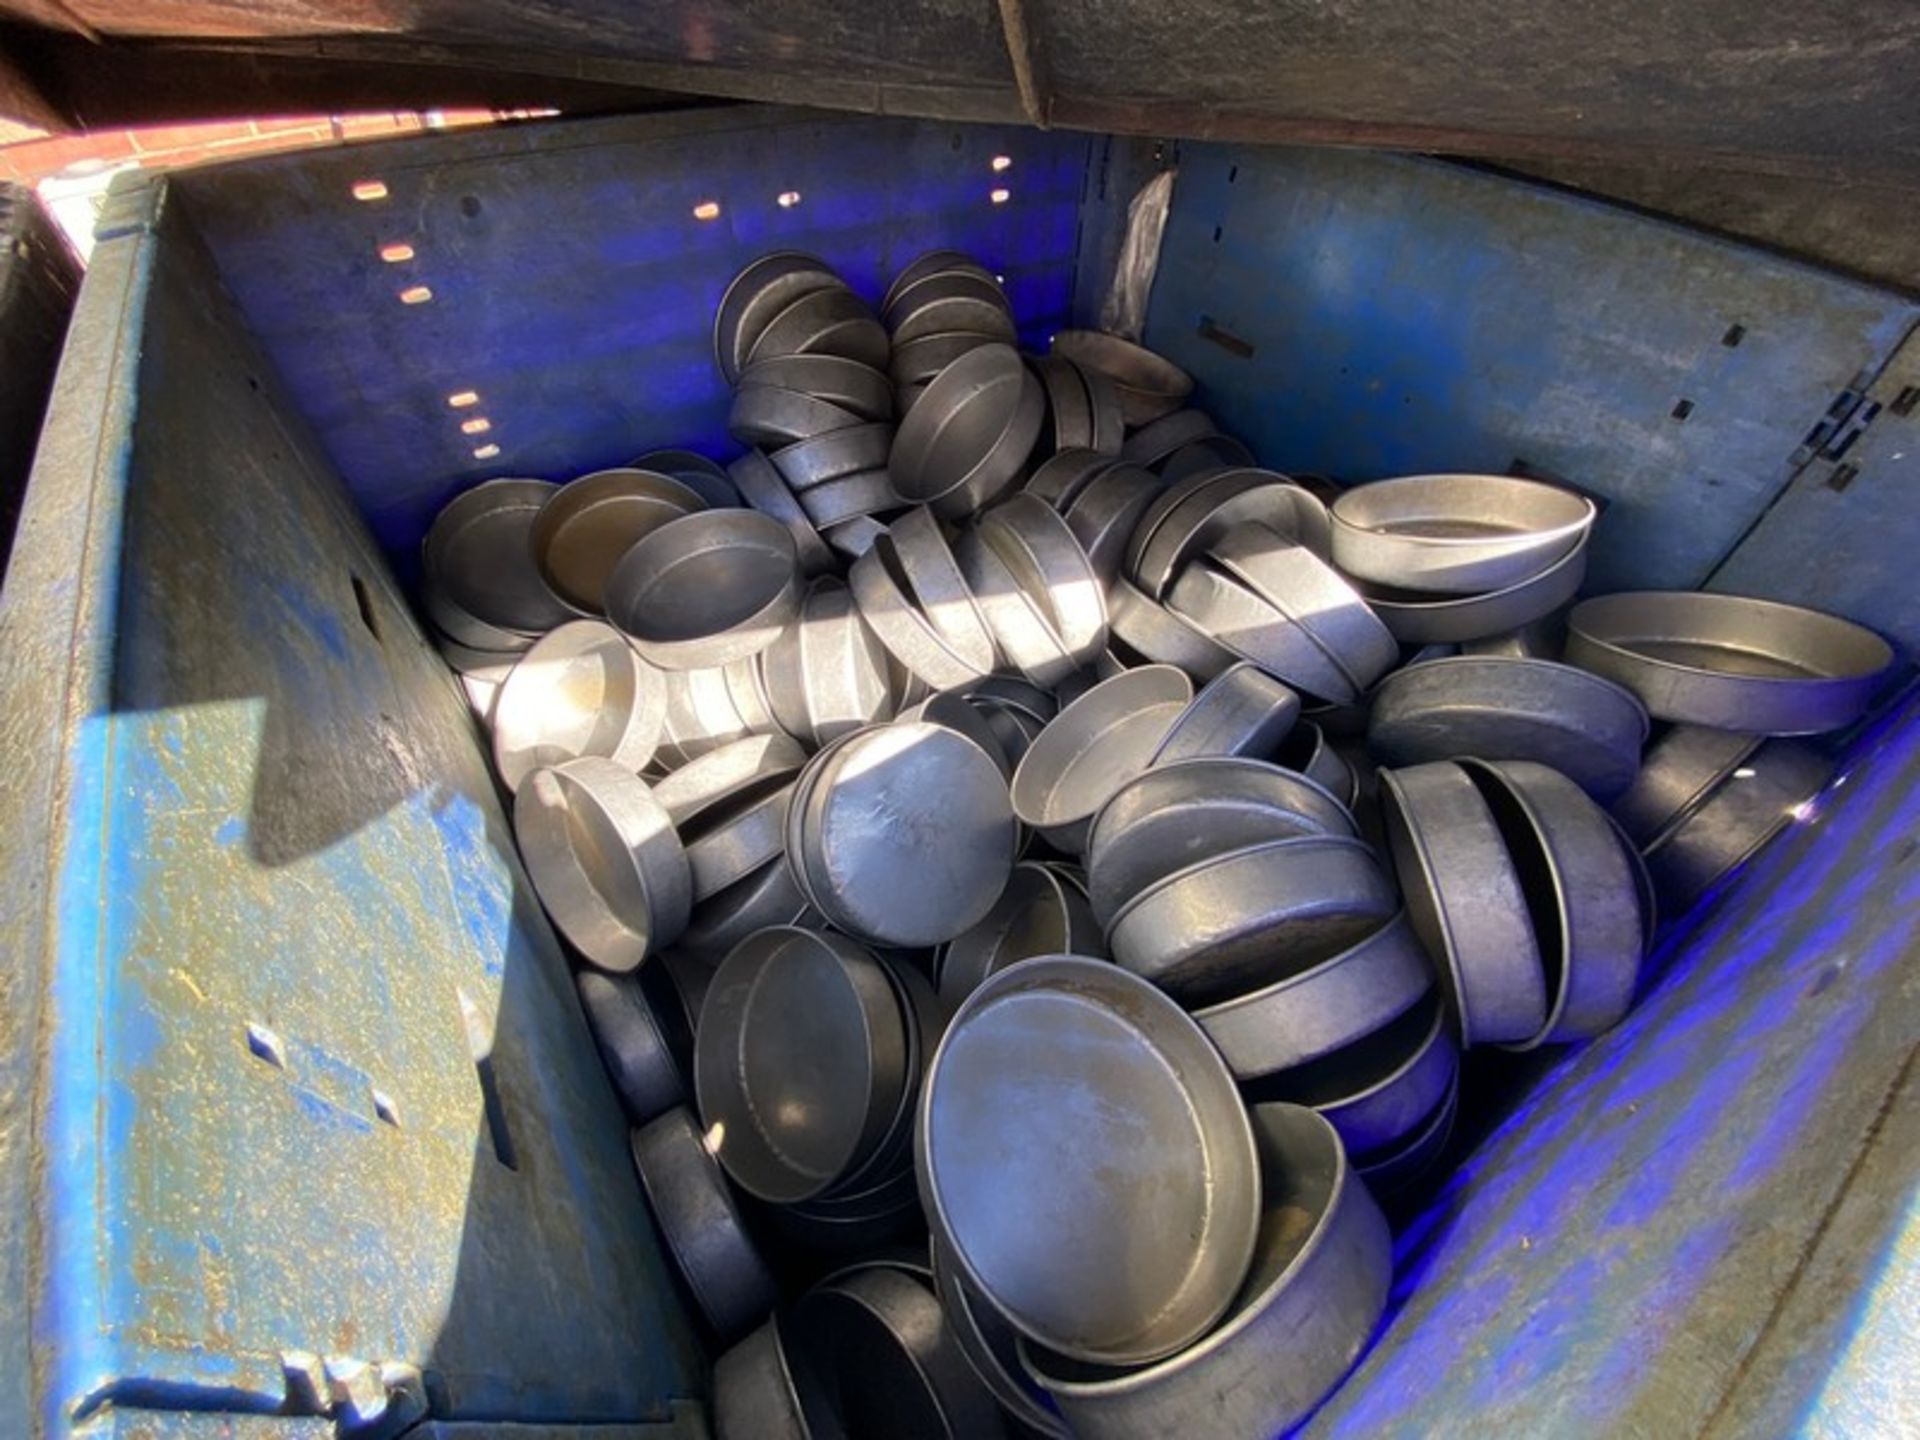 Lot of Assorted 8” Round Aluminum Pans,Aprox. (200) Pans with Aprox. 48” L x 45” W x 49” H Plastic - Image 3 of 3